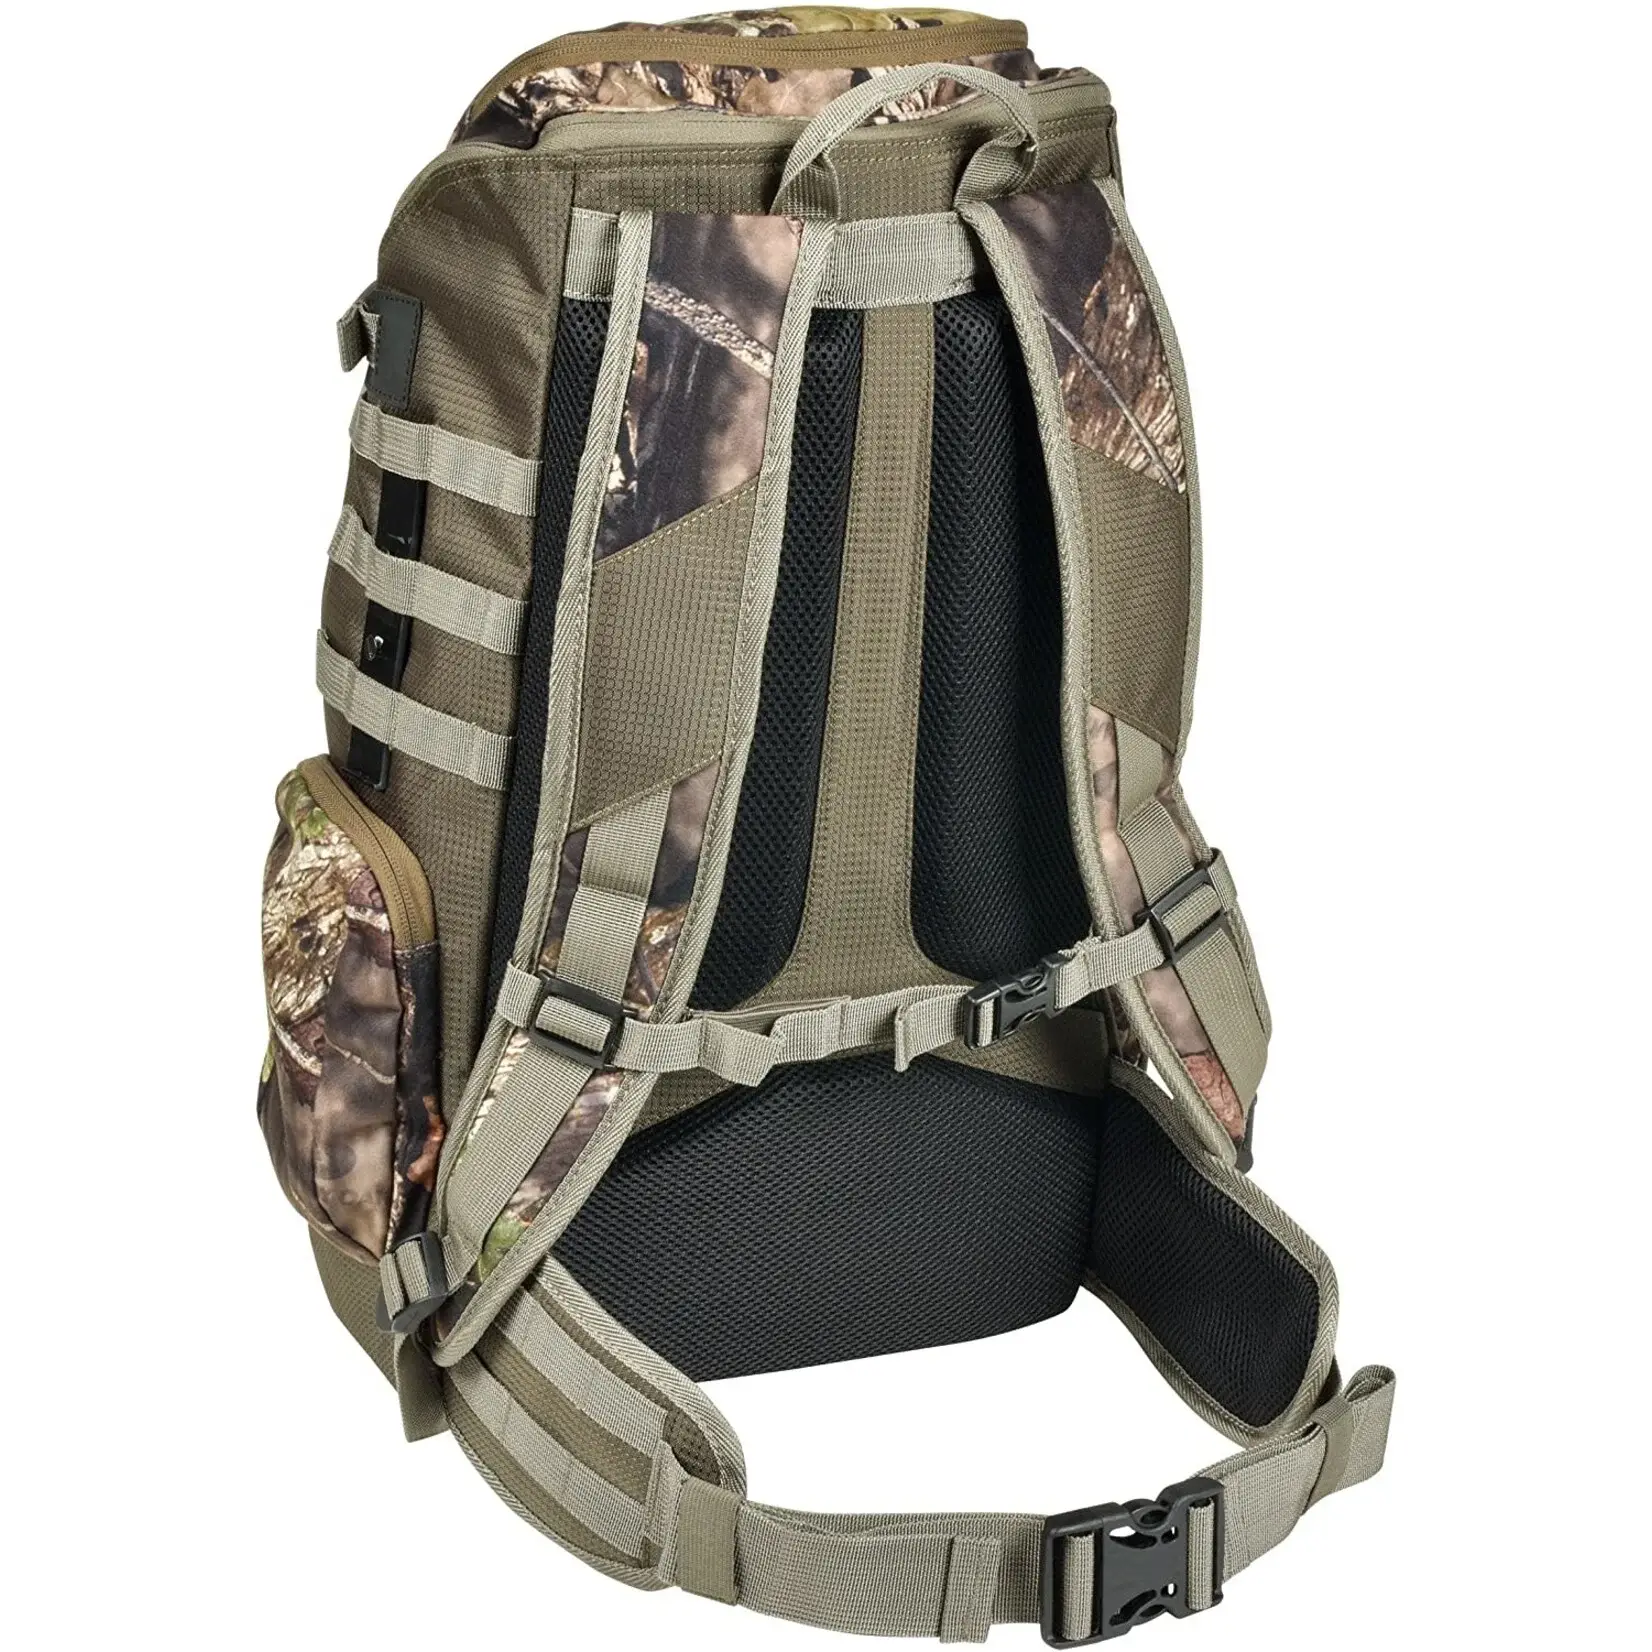 HQ OUTFITTERS HQ OUTFITTERS DAY PACK MOSSY OAK TERRA GILA